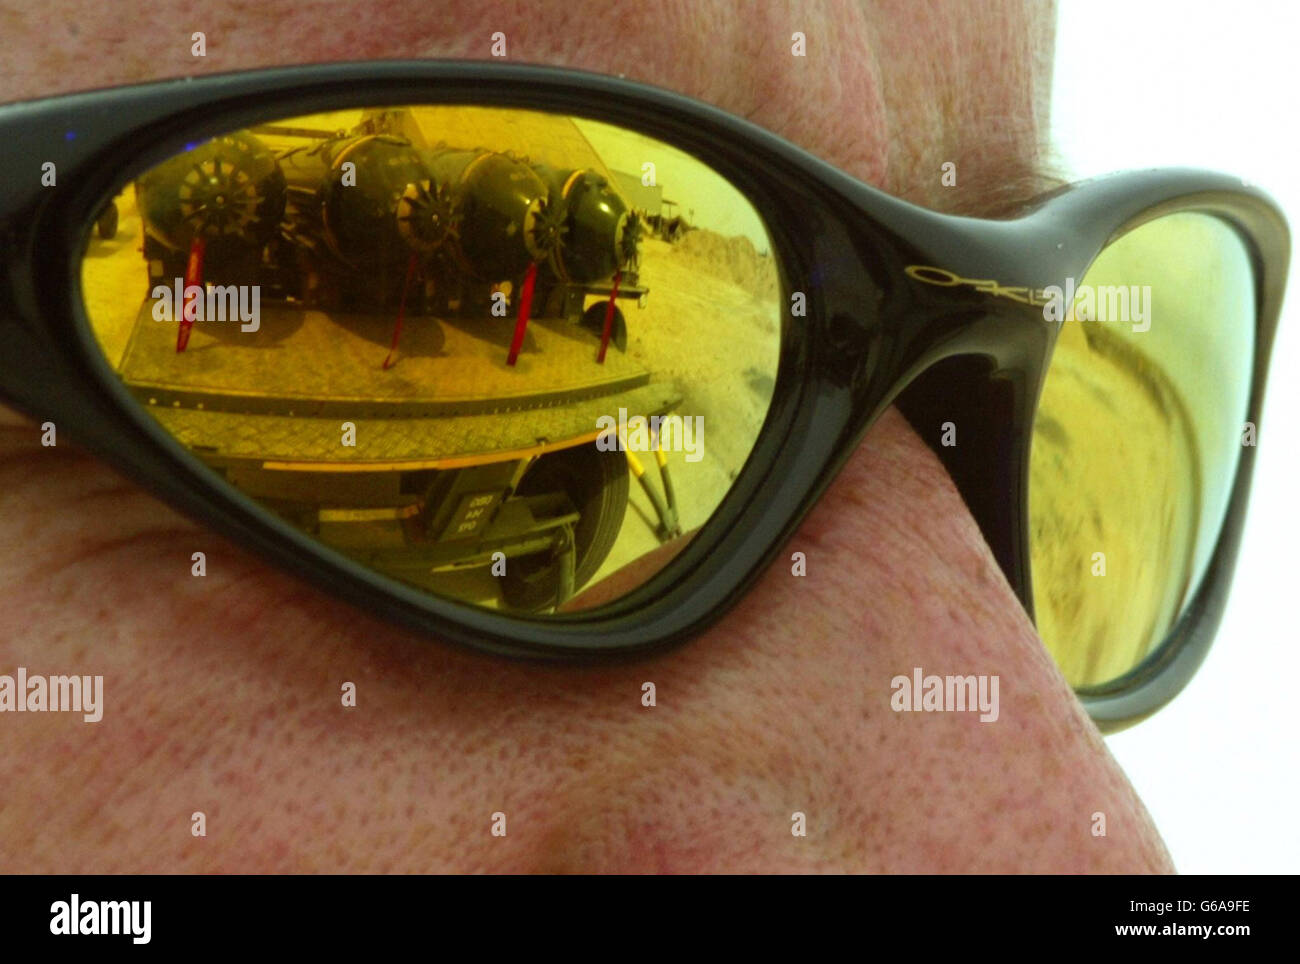 A British Royal Air Force Harrier GR7 engineering technician (propulsion) Darren Dowd has a bomb-trolley of cluster bombs reflected in his sunglasses prior to the bombs being loaded onto an aircraft in Kuwait. *... The United States admits it has used them in Iraq; Britain says it has them, but would not use them in built-up areas; Iraq says they have killed dozens of civilians; and human rights groups insist they should be banned. Cluster bombs are deadly but unpredictable - each contain over 200 bomblets the size of a drinks can which scatter over an area the size of two soccer pitches, Stock Photo